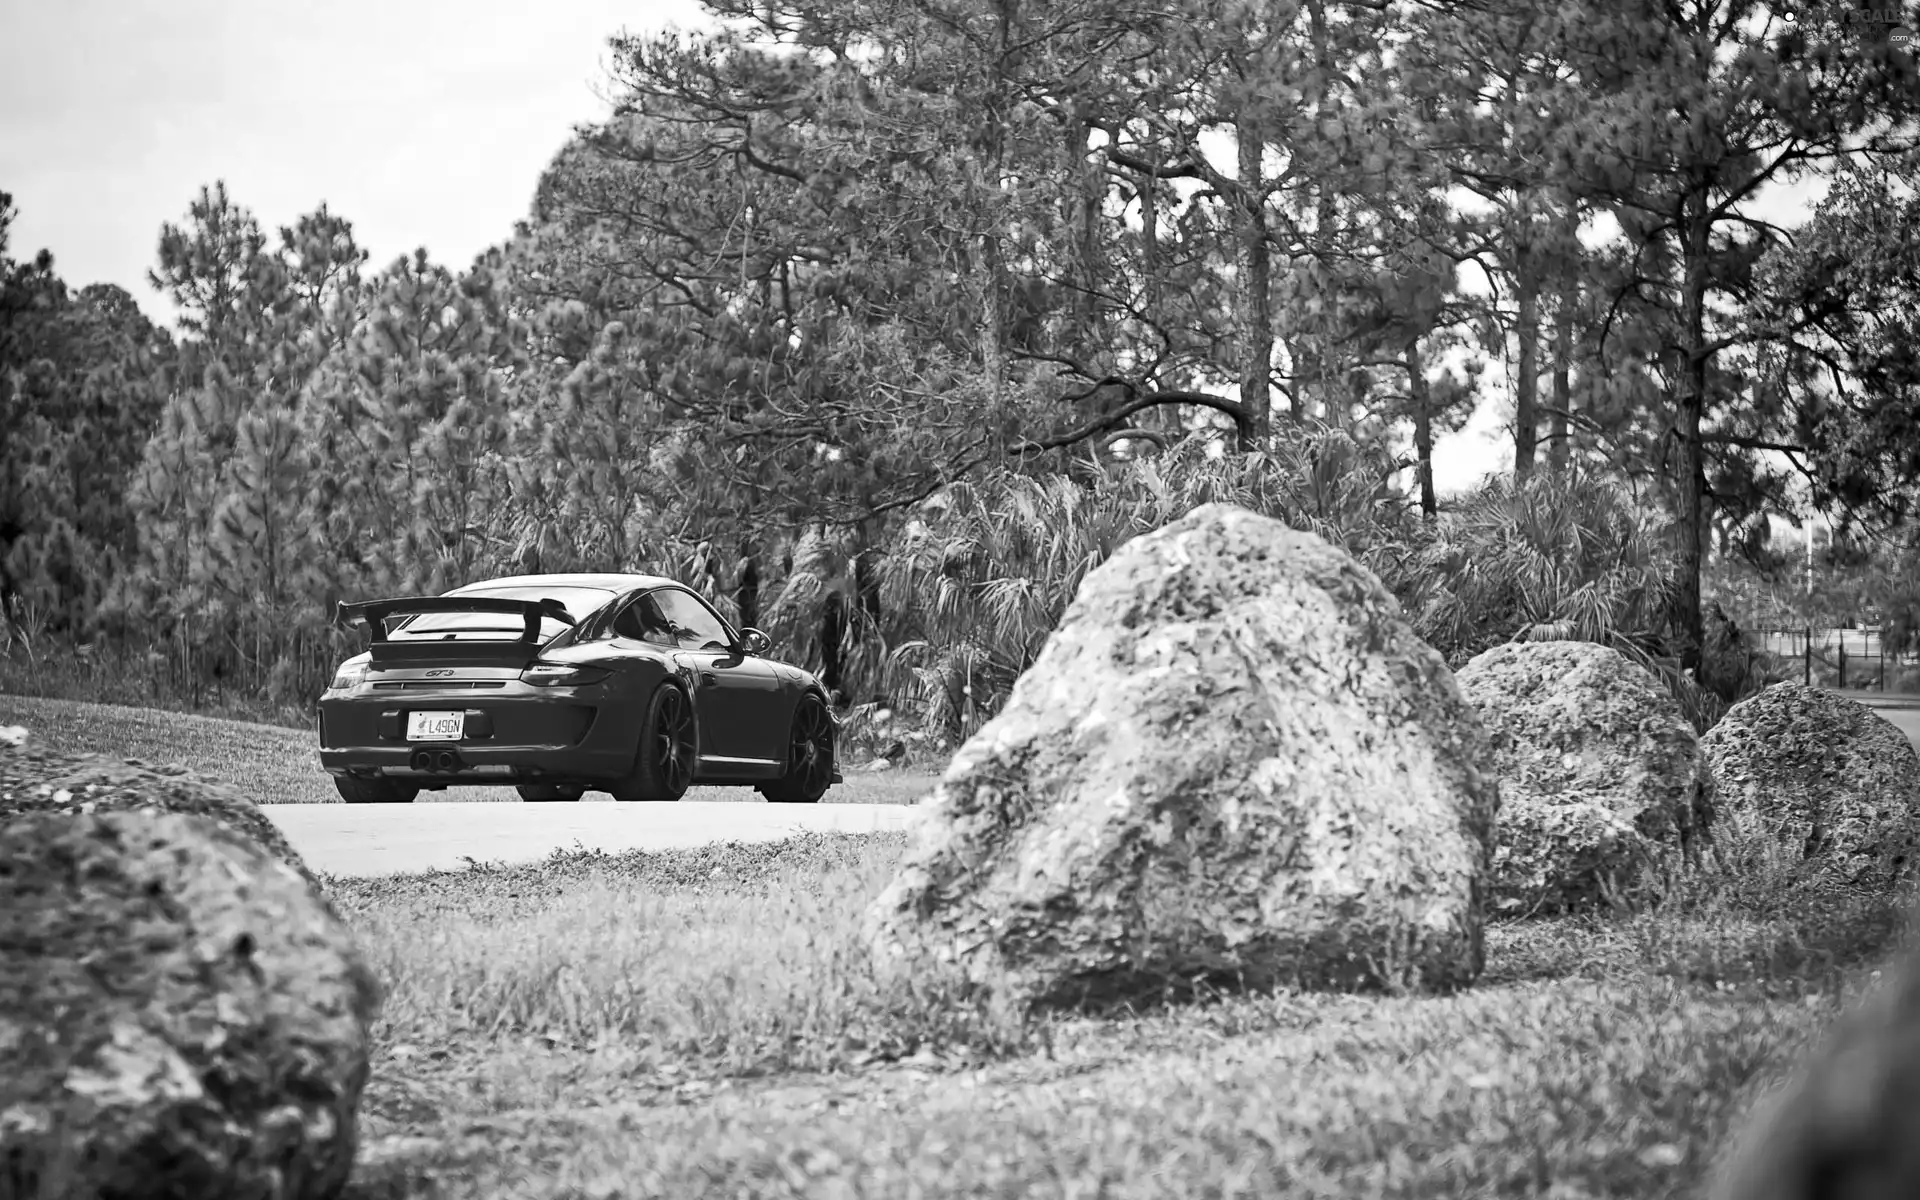 911, Red, viewes, Stones, trees, Porsche